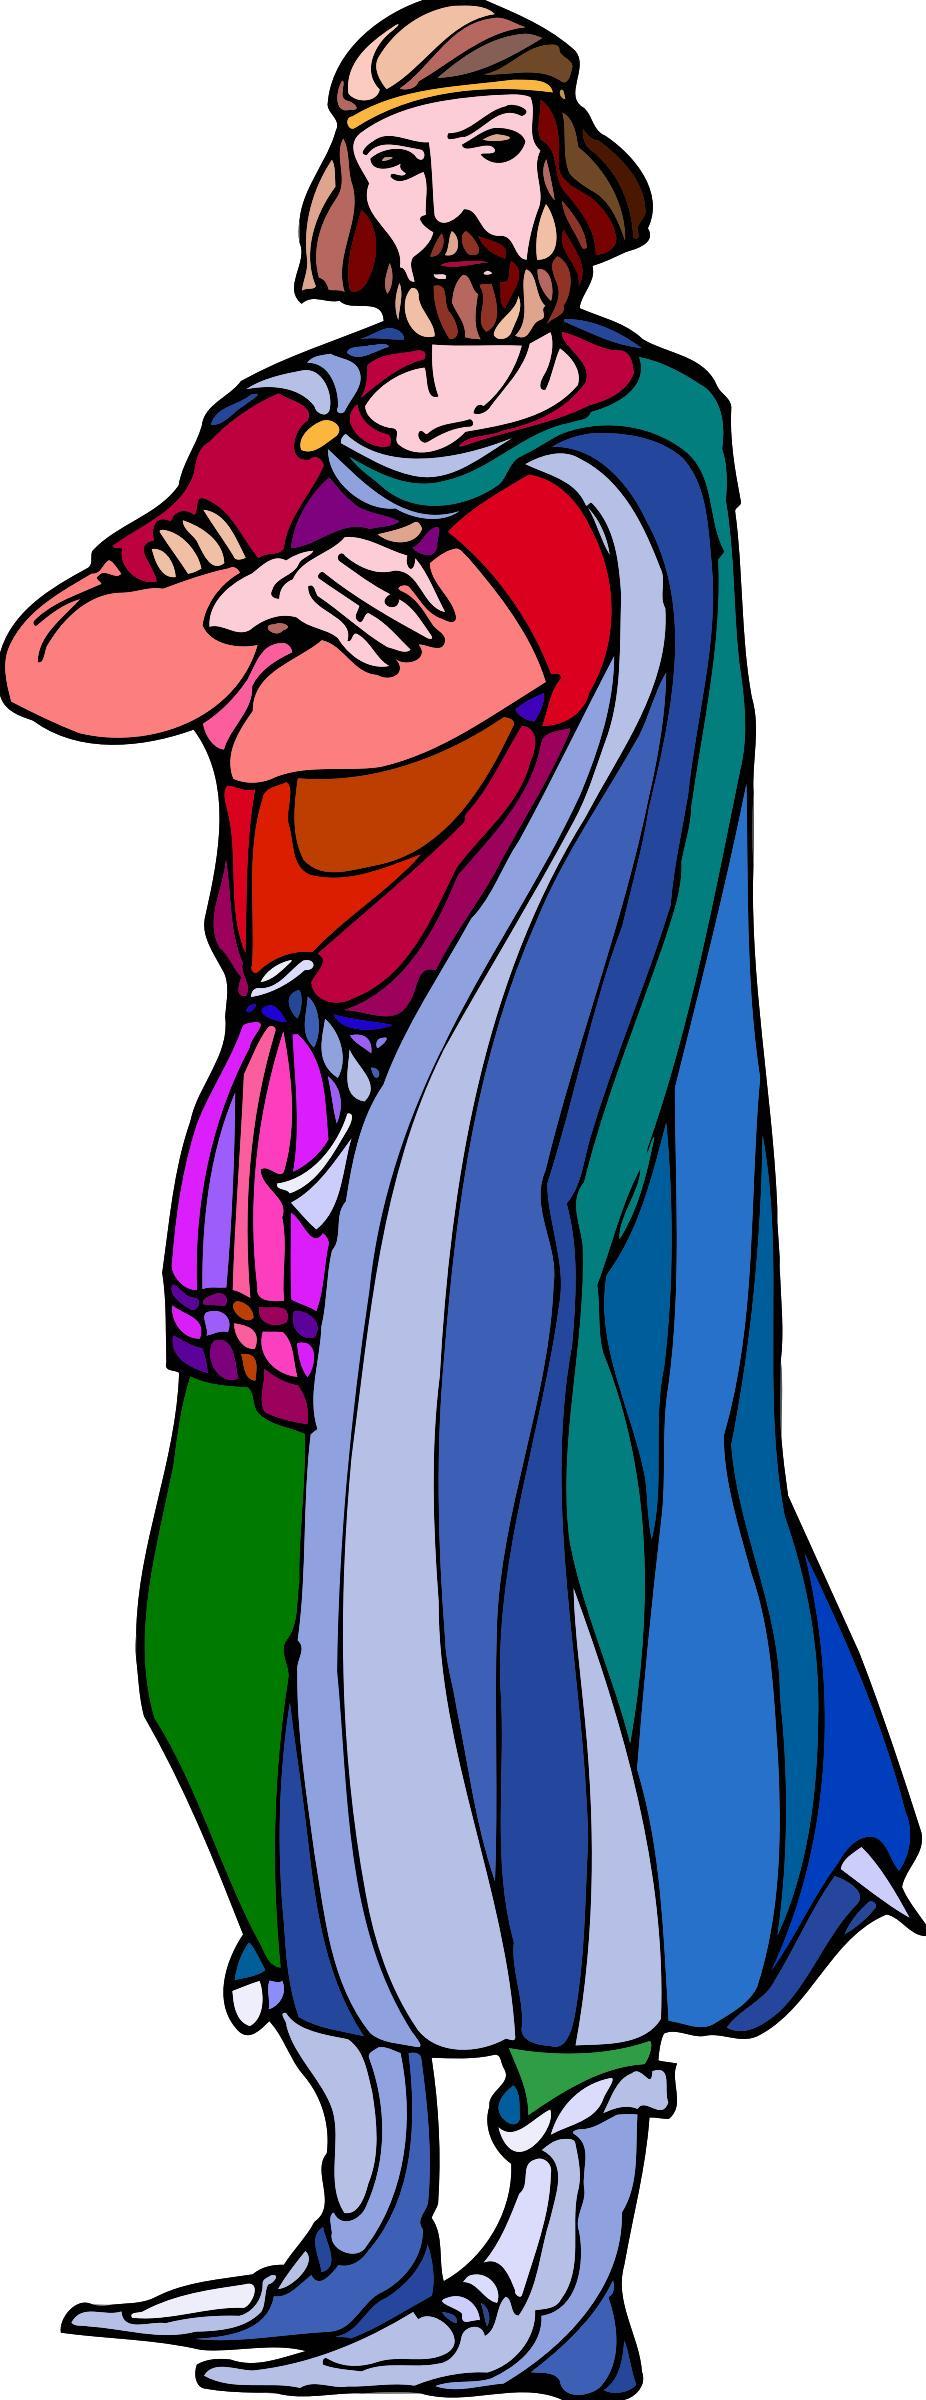 Shakespeare characters - Macbeth (colour) png transparent